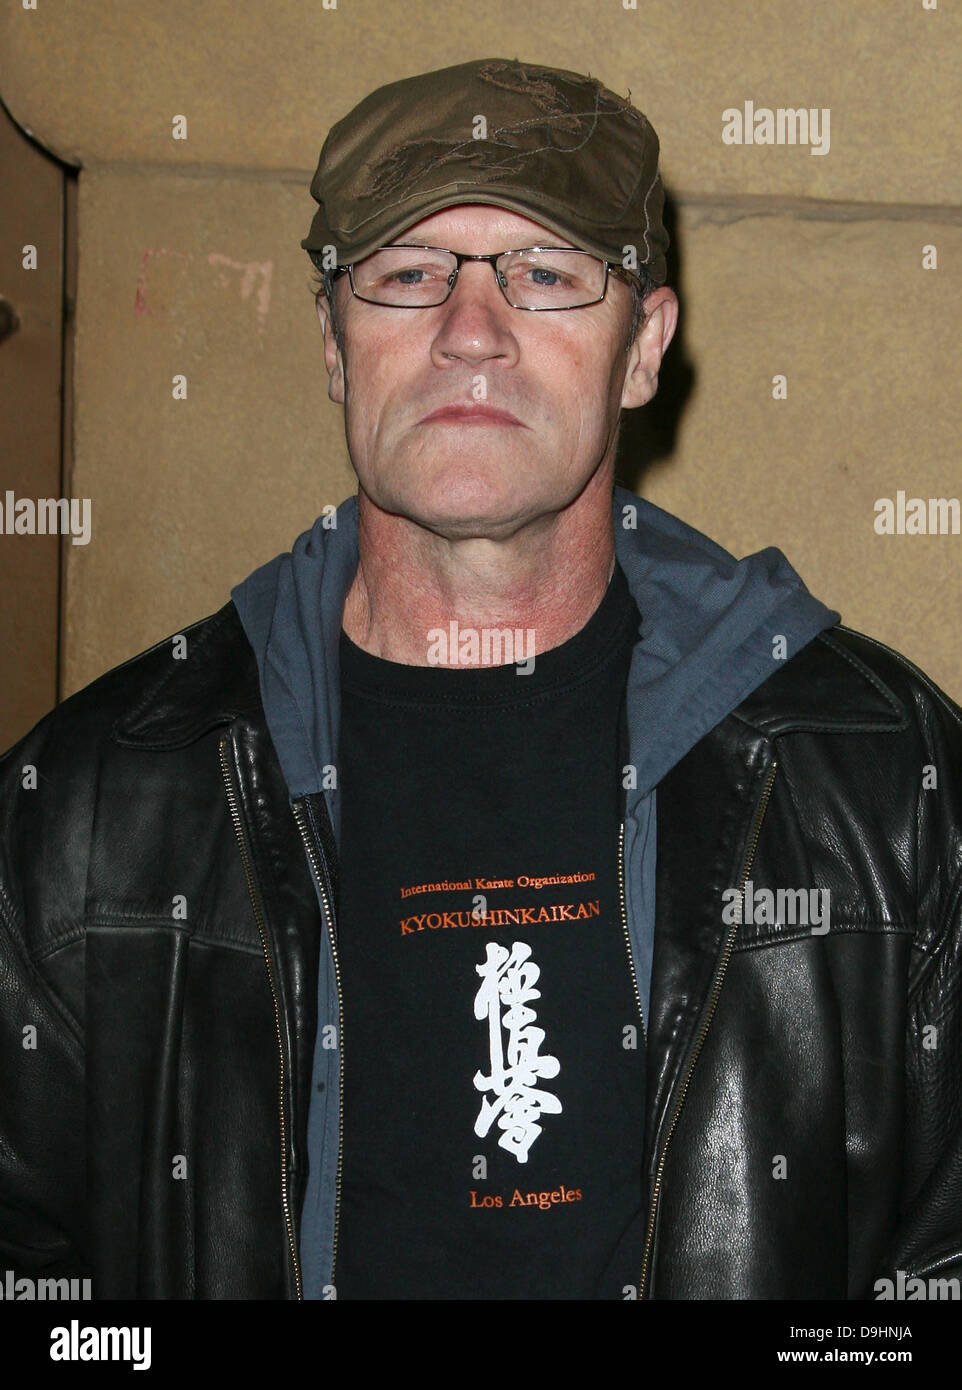 Michael Rooker Los Angeles Premiere of 'Super' held at The Egyptian Theatre Hollywood, California - 21.03.11 Stock Photo